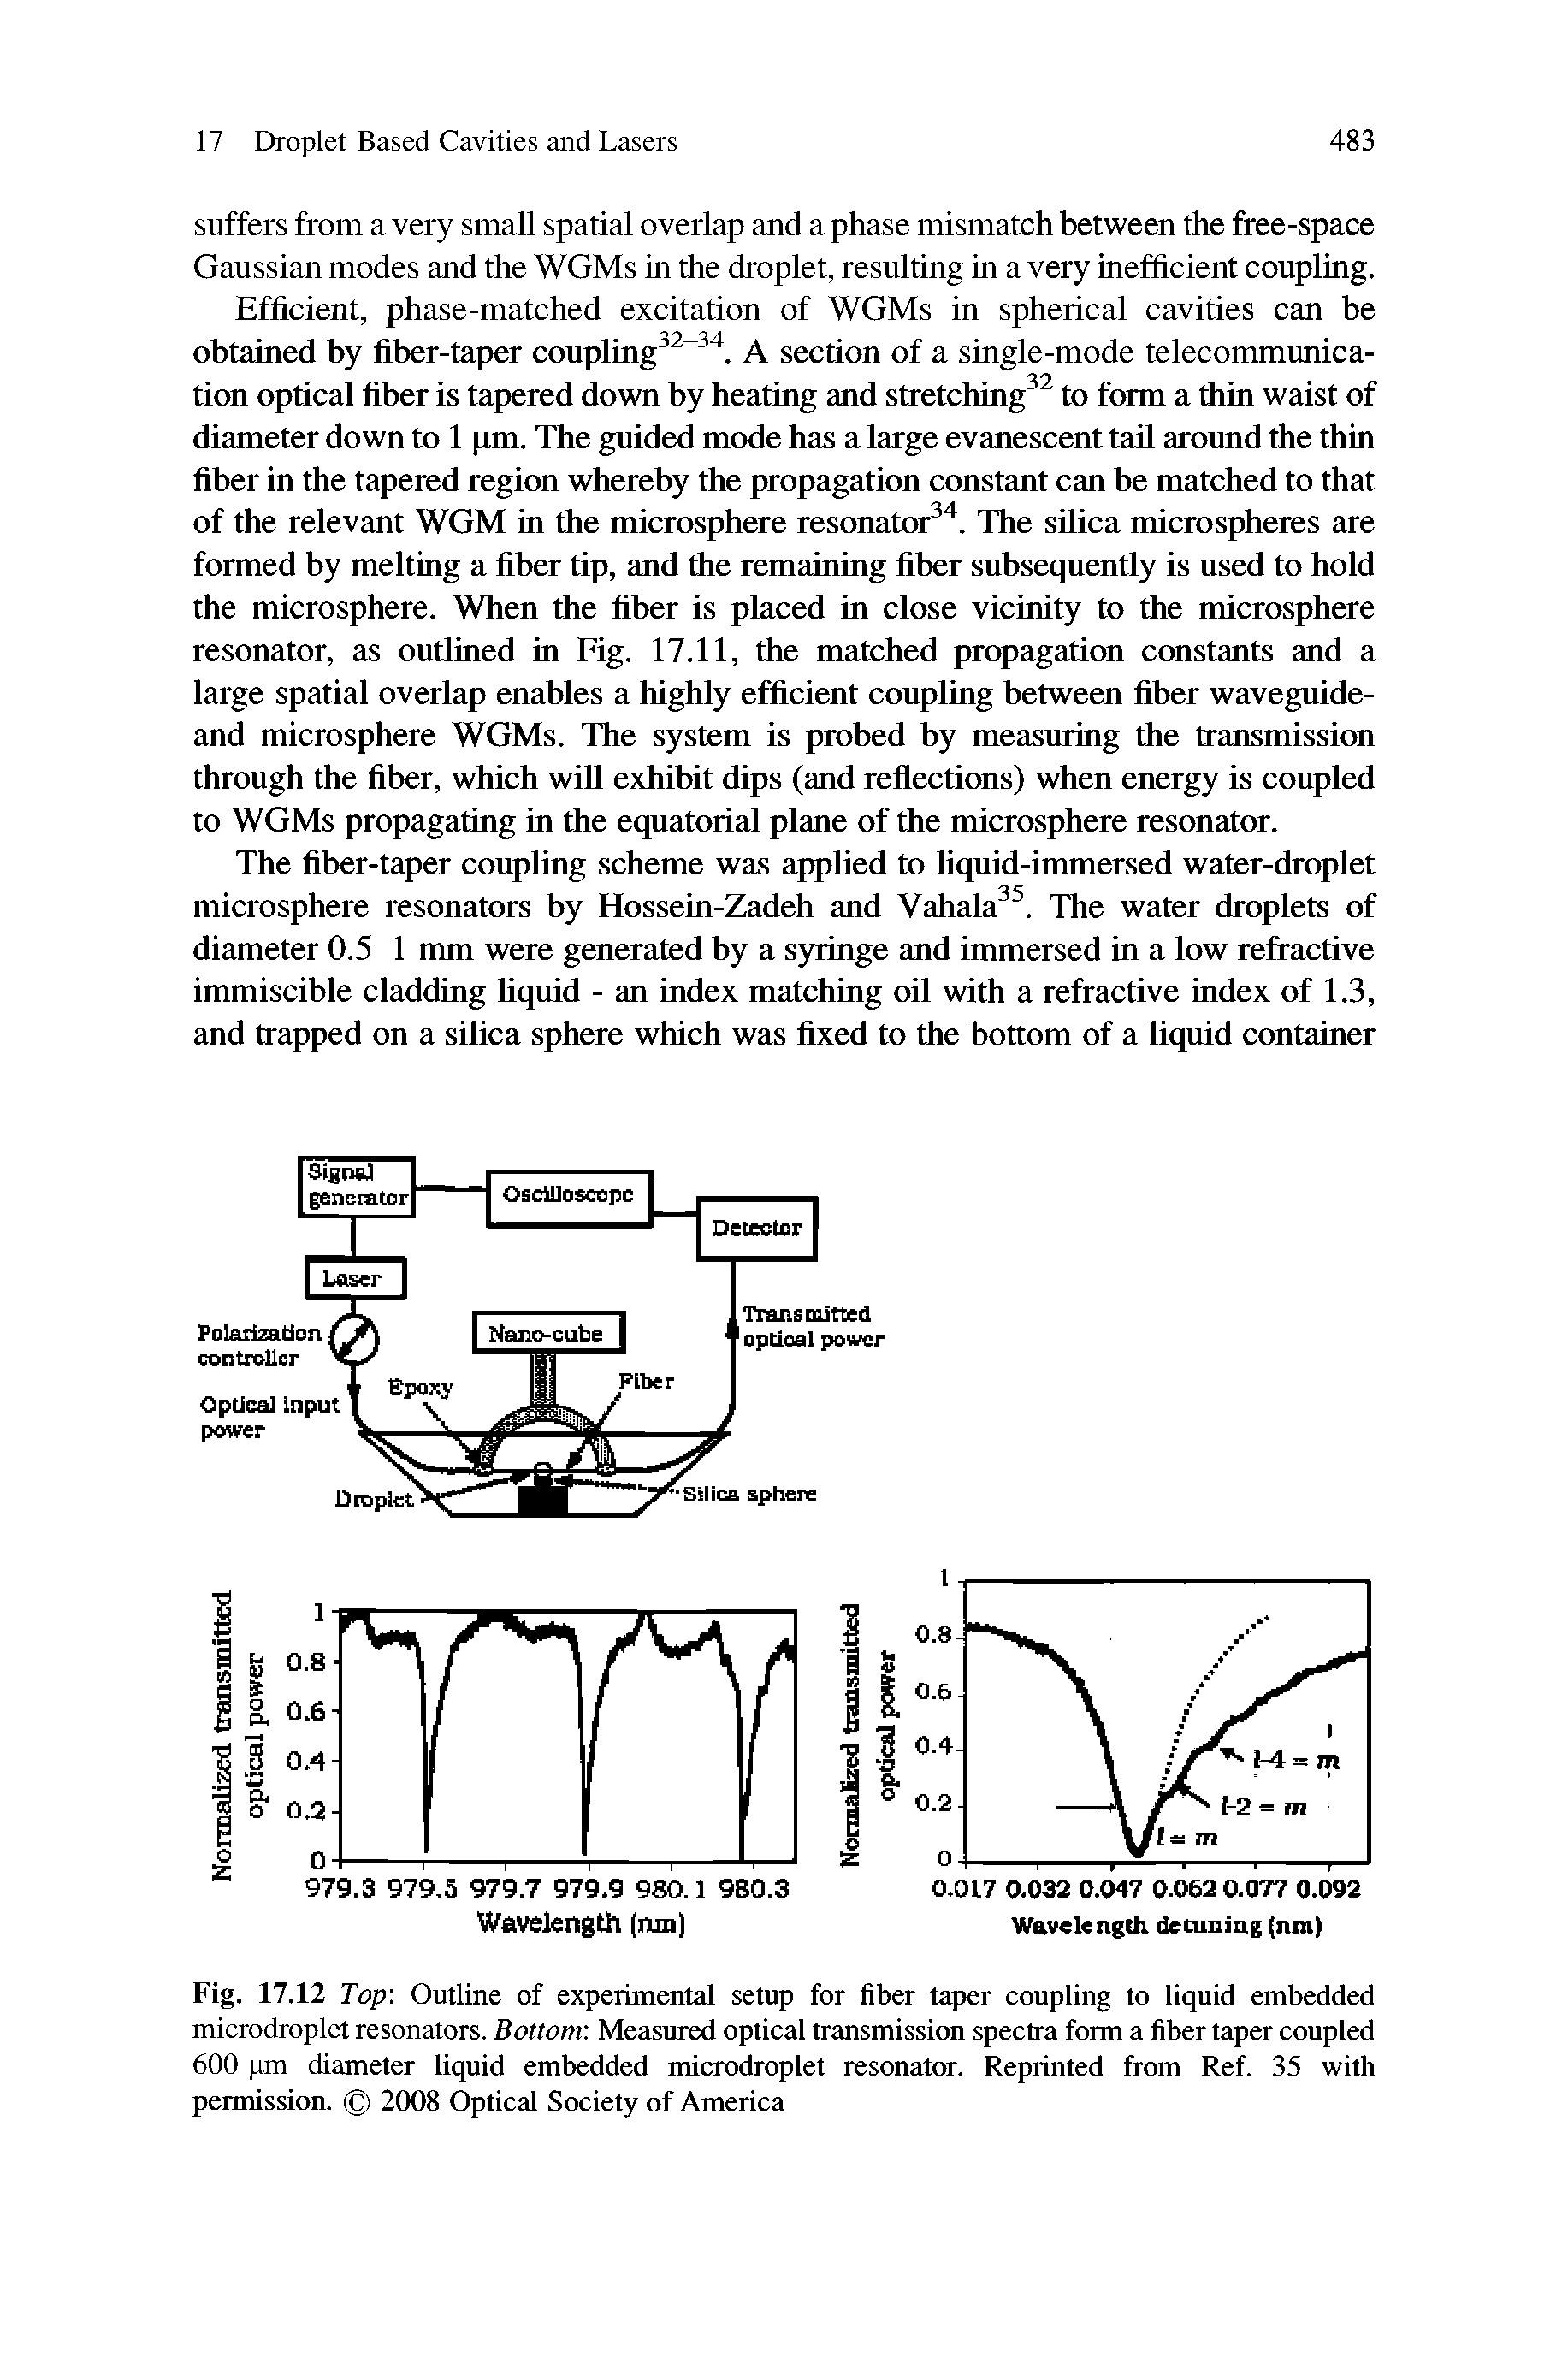 Fig. 17.12 Top Outline of experimental setup for fiber taper coupling to liquid embedded microdroplet resonators. Bottom Measured optical transmission spectra form a fiber taper coupled 600 pm diameter liquid embedded microdroplet resonator. Reprinted from Ref. 35 with permission. 2008 Optical Society of America...